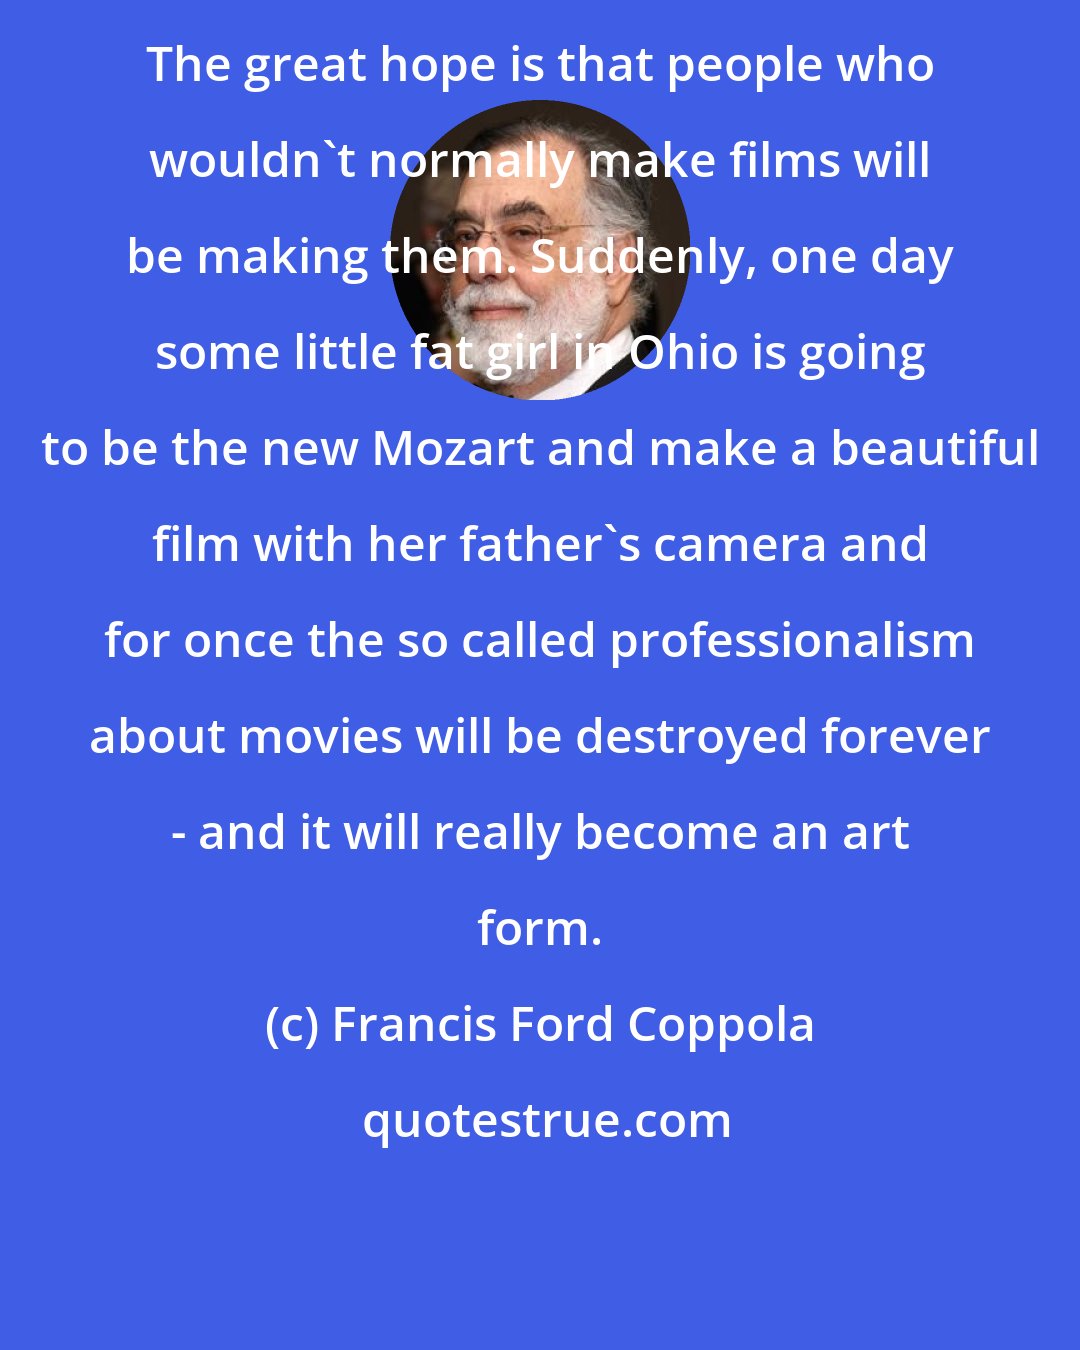 Francis Ford Coppola: The great hope is that people who wouldn't normally make films will be making them. Suddenly, one day some little fat girl in Ohio is going to be the new Mozart and make a beautiful film with her father's camera and for once the so called professionalism about movies will be destroyed forever - and it will really become an art form.